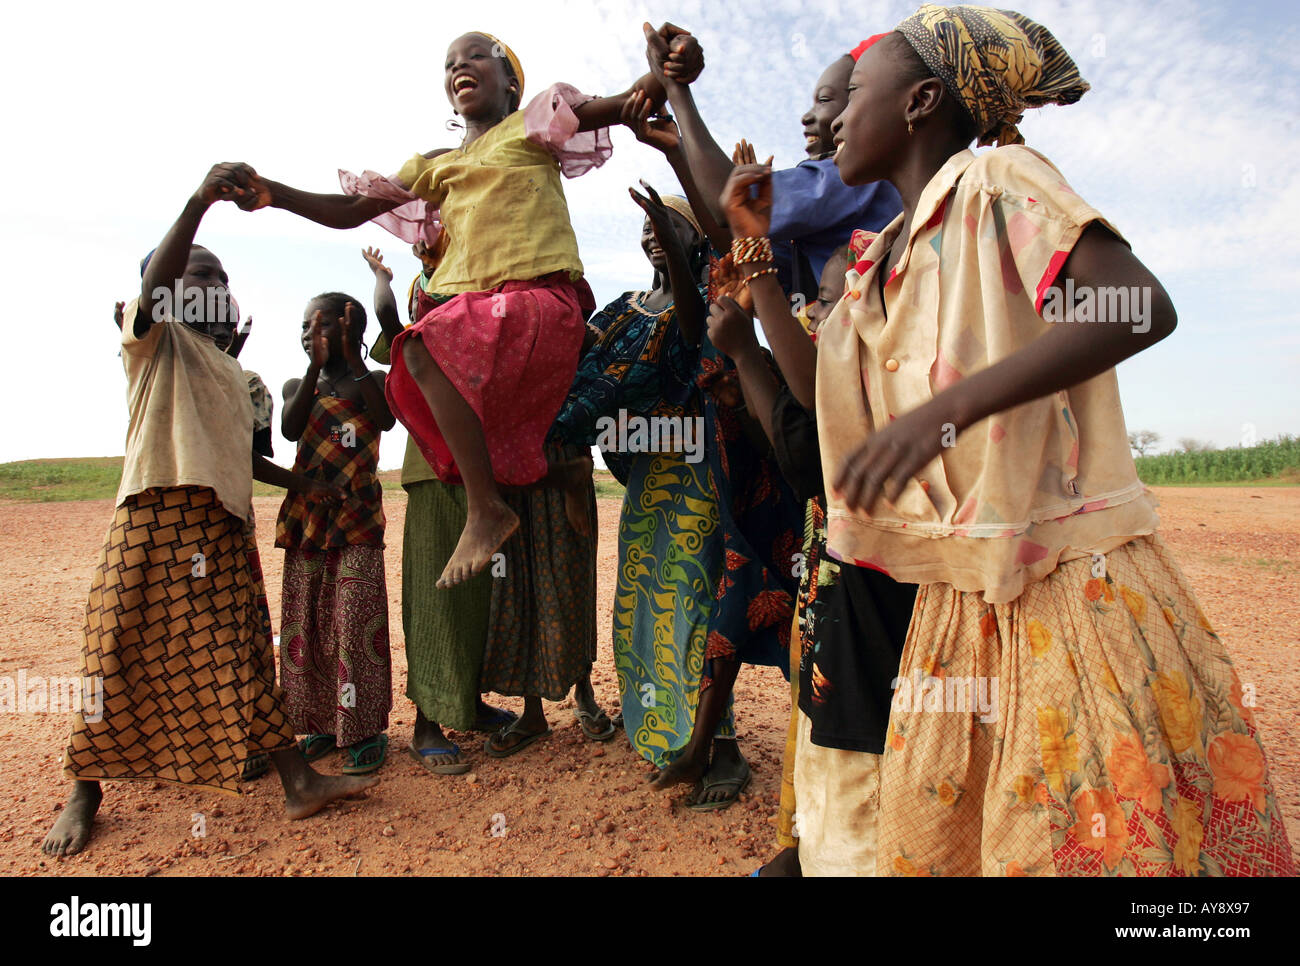 YOUNG GIRLS PERFORM A RAIN DANCE IN DESPERATE HOPE FOR RAIN TO HELP THE WILTING CROPS GROW IN A   VILLIAGE  NEAR THE FAMINE STRI Stock Photo